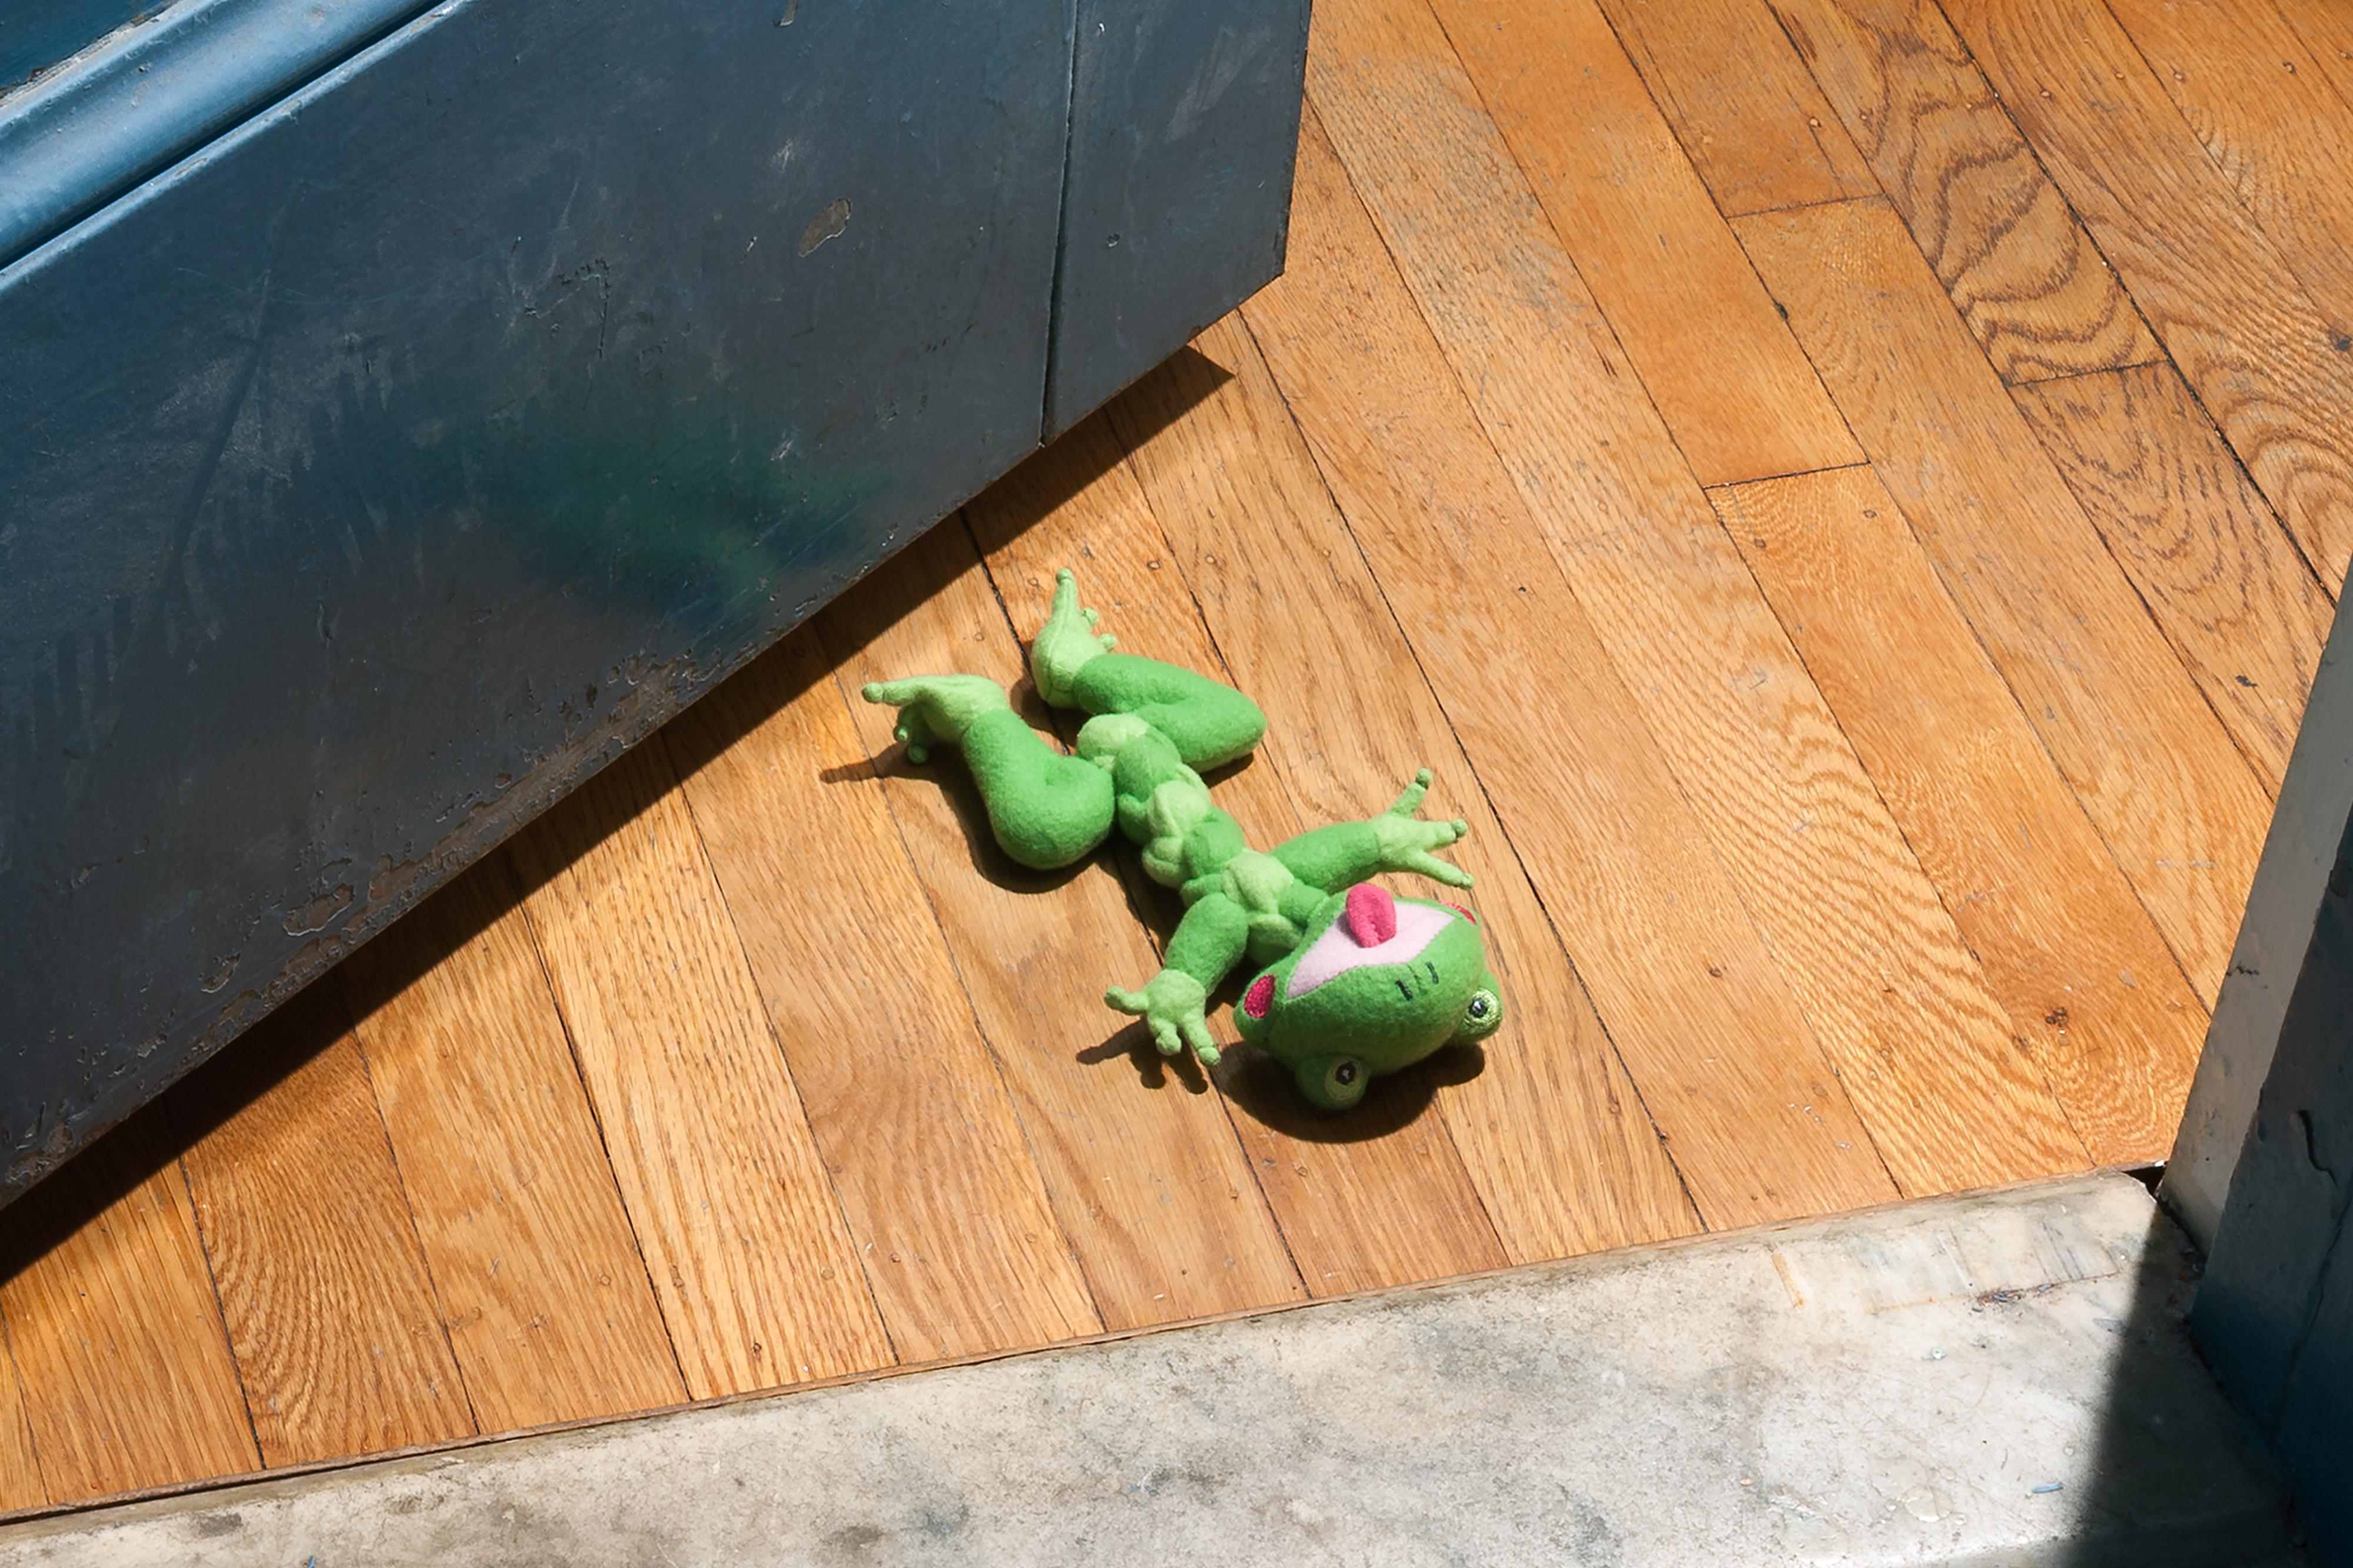 “Morbidity & Mortality: Frog” Humorous Photograph of a Dog Toy in Crime Scene - Contemporary Print by Jeanette May